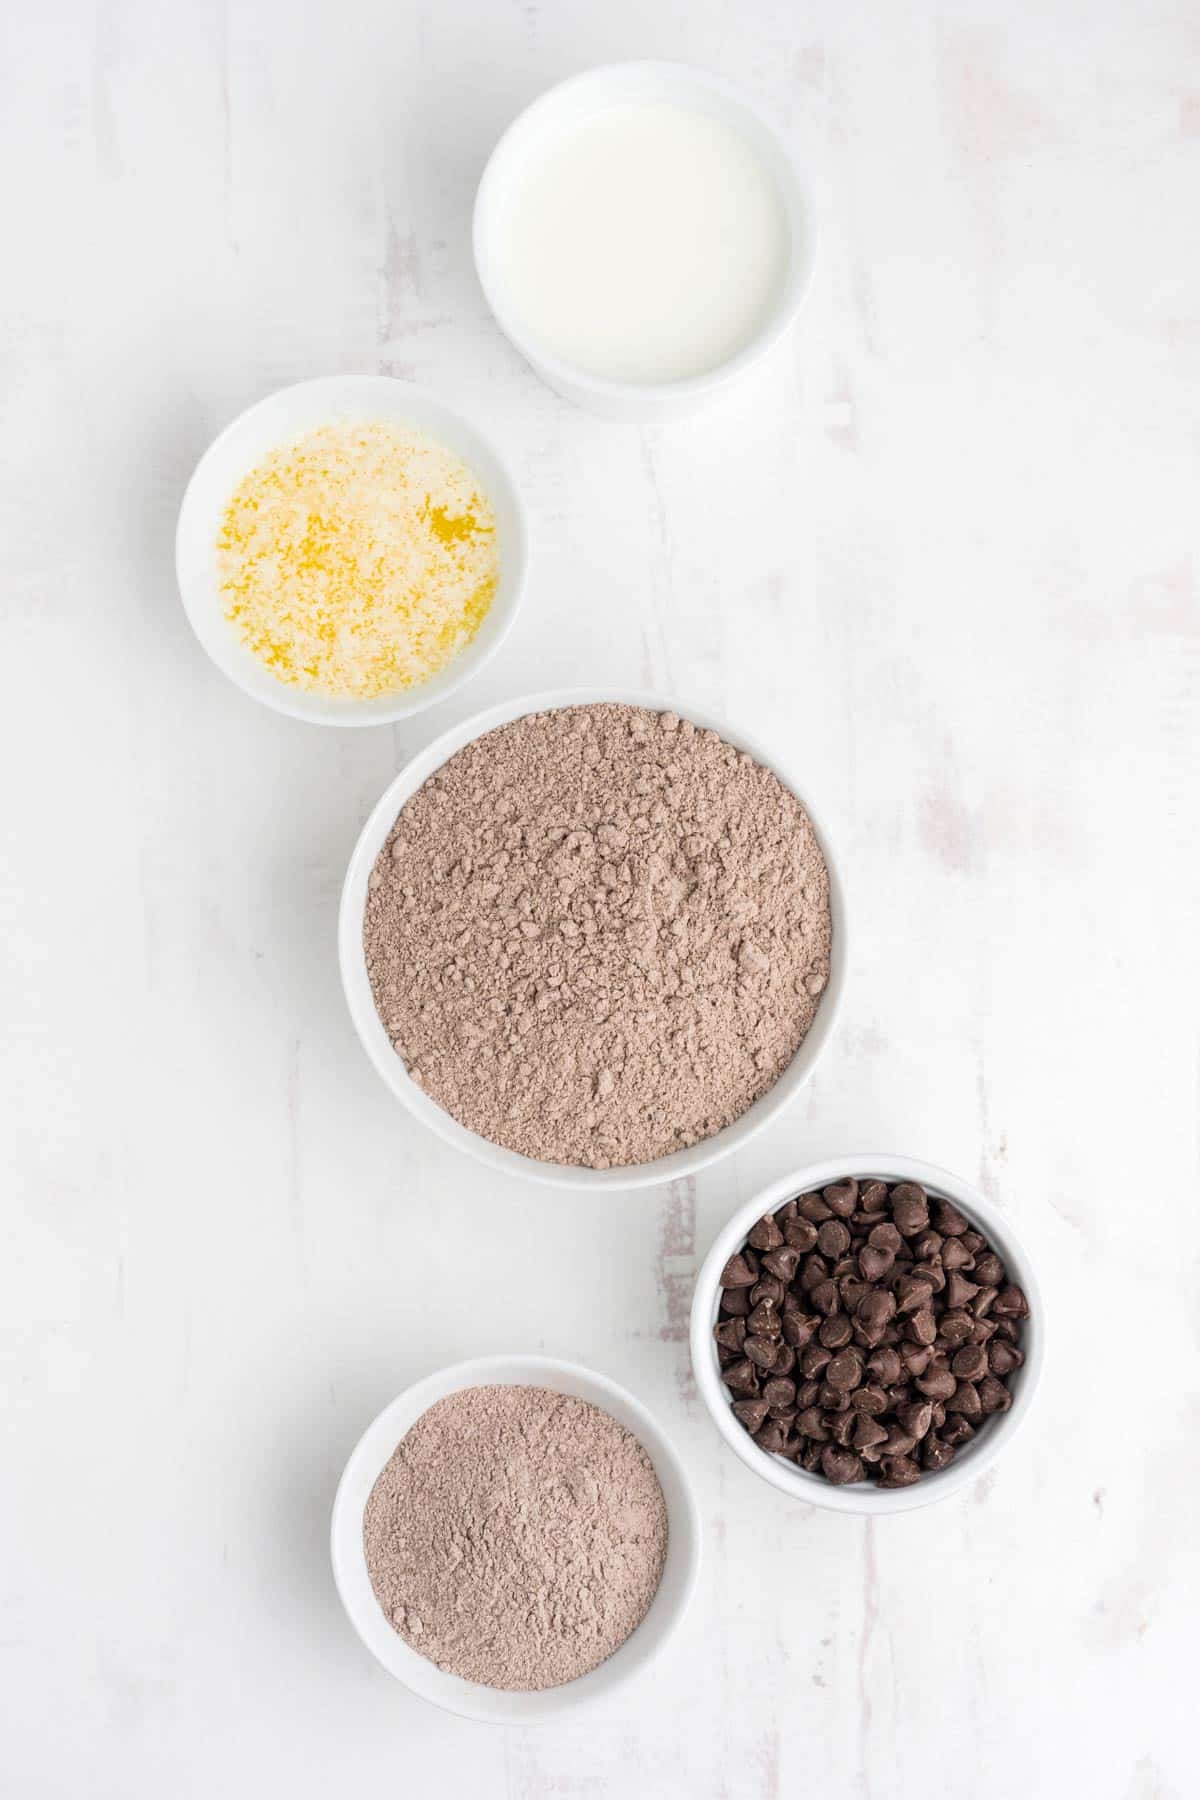 Ingredients to make chocolate dump cake on the table.